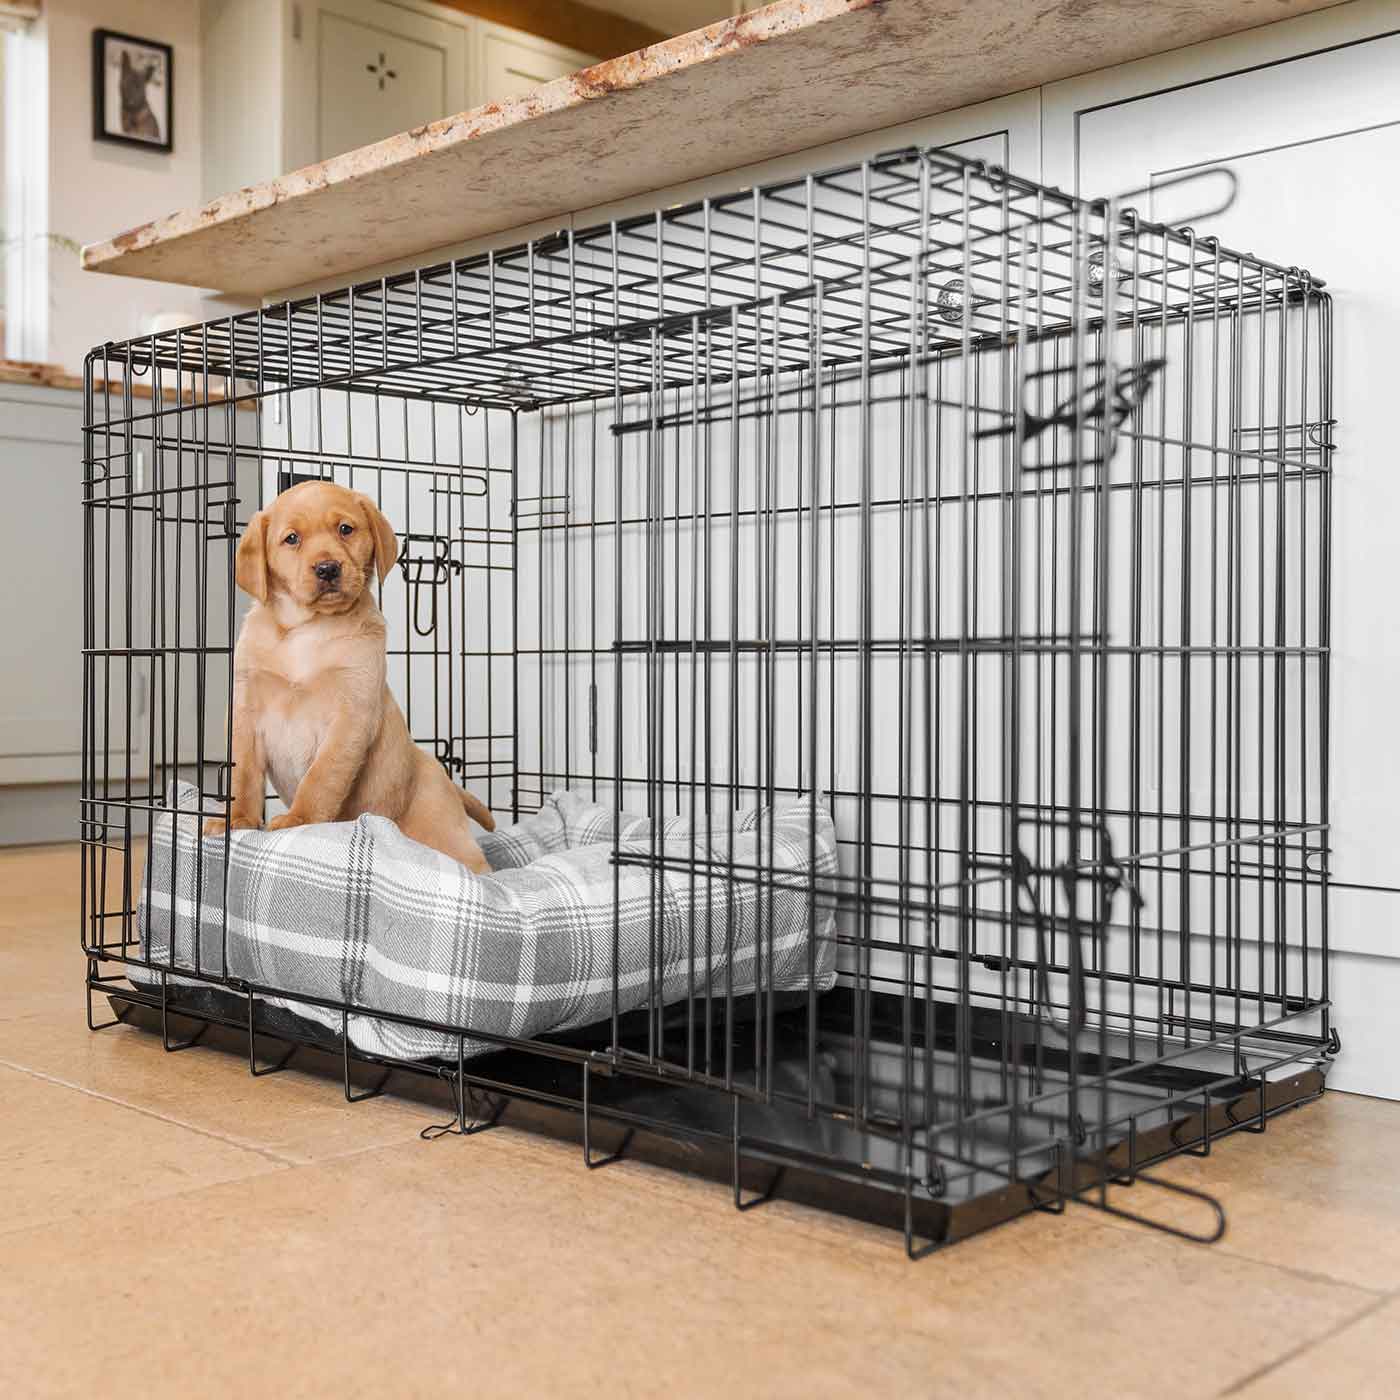  Cosy & Calm Puppy Crate Bed, The Perfect Dog Crate Accessory For The Ultimate Dog Den! In Stunning Dove Grey Tweed! Available Now at Lords & Labradors